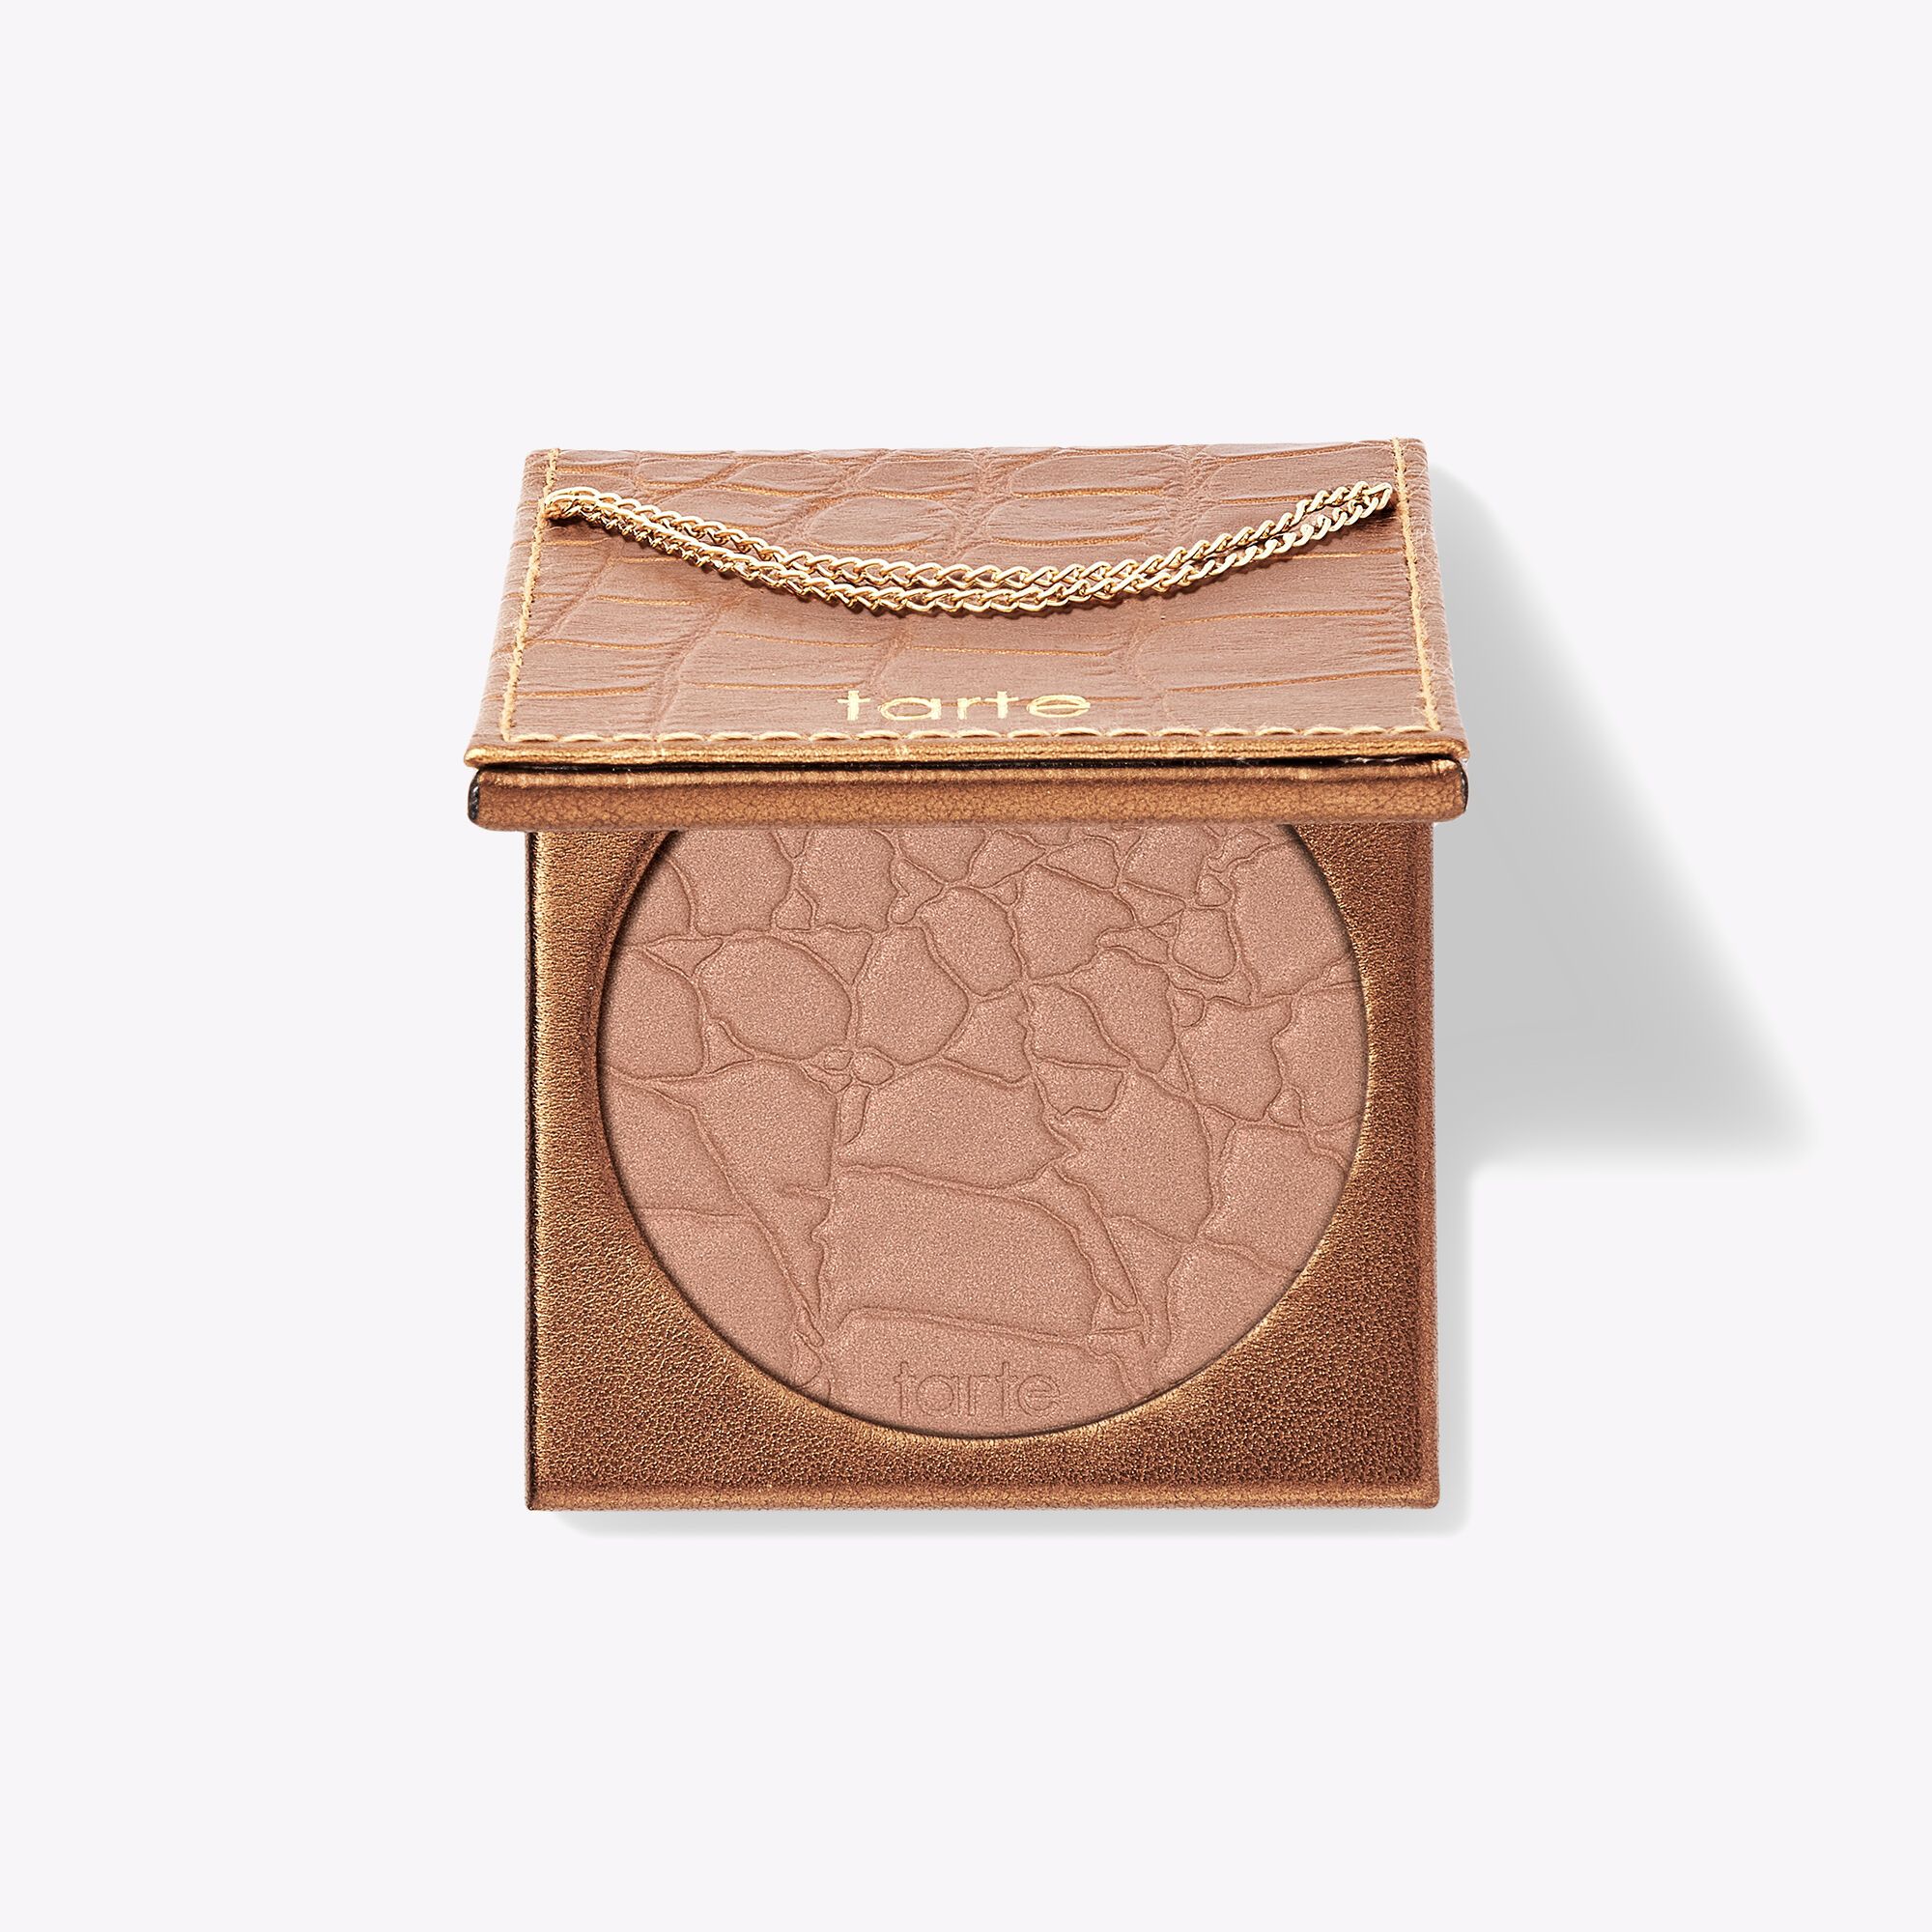 Amazonian clay waterproof bronzer - park ave princess (shimmery gold) | tarte cosmetics (US)